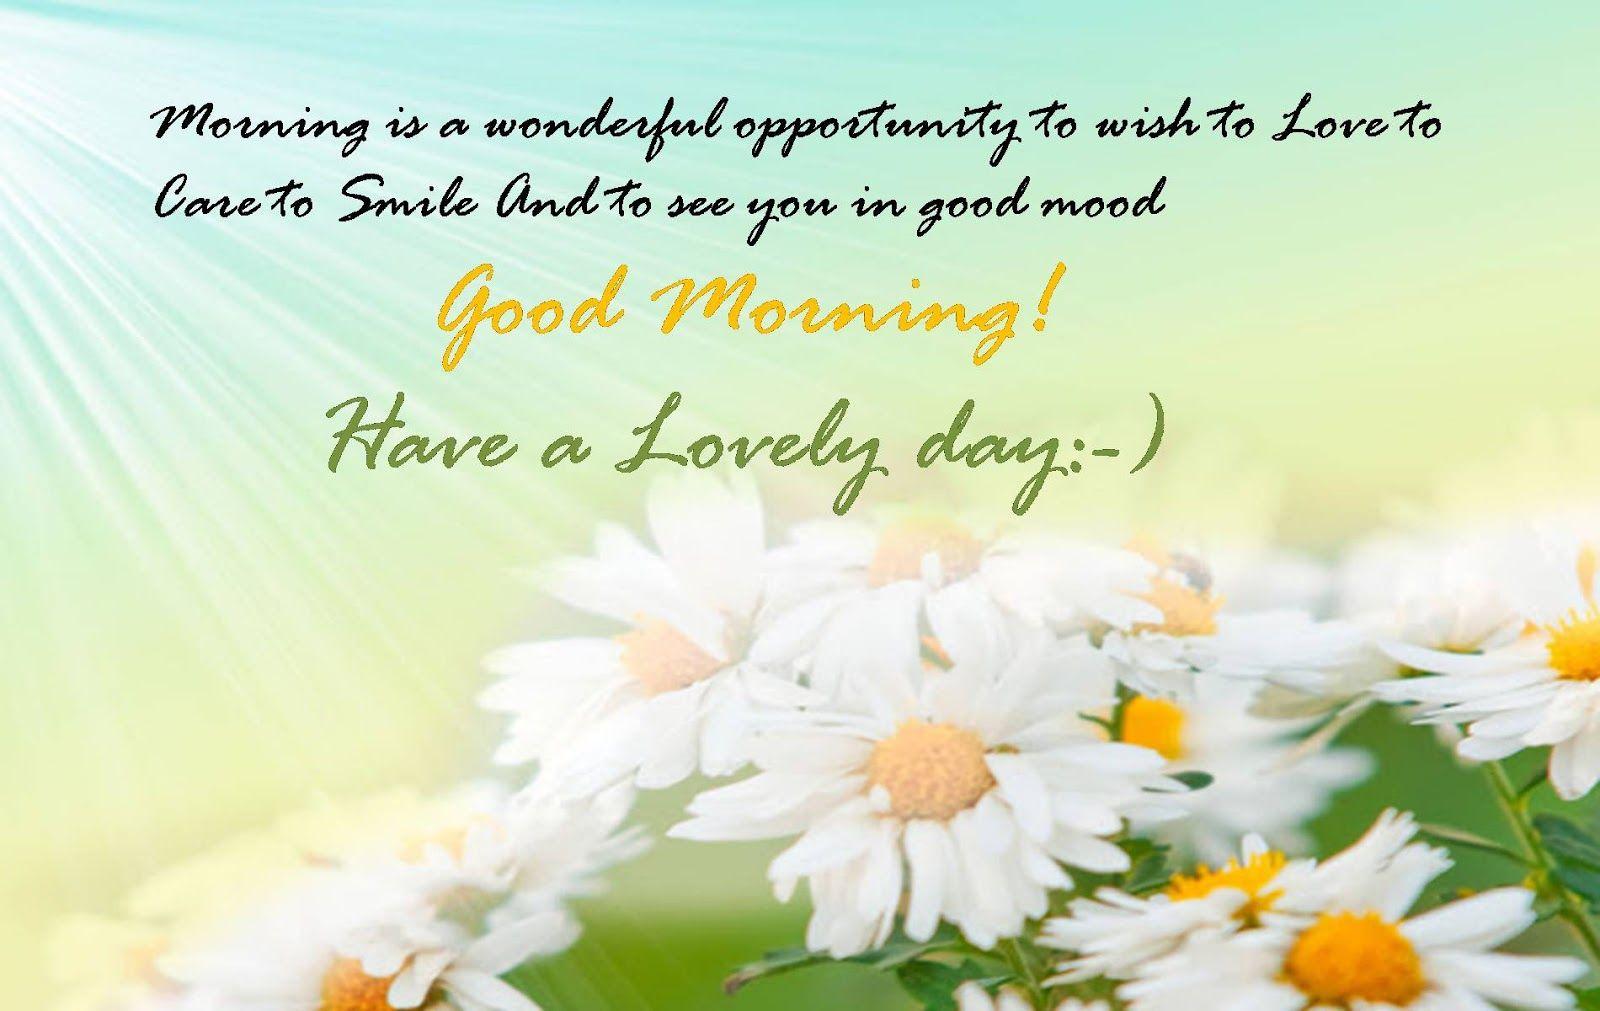 Good Morning Wishes and Greetings Wallpaper Free Image